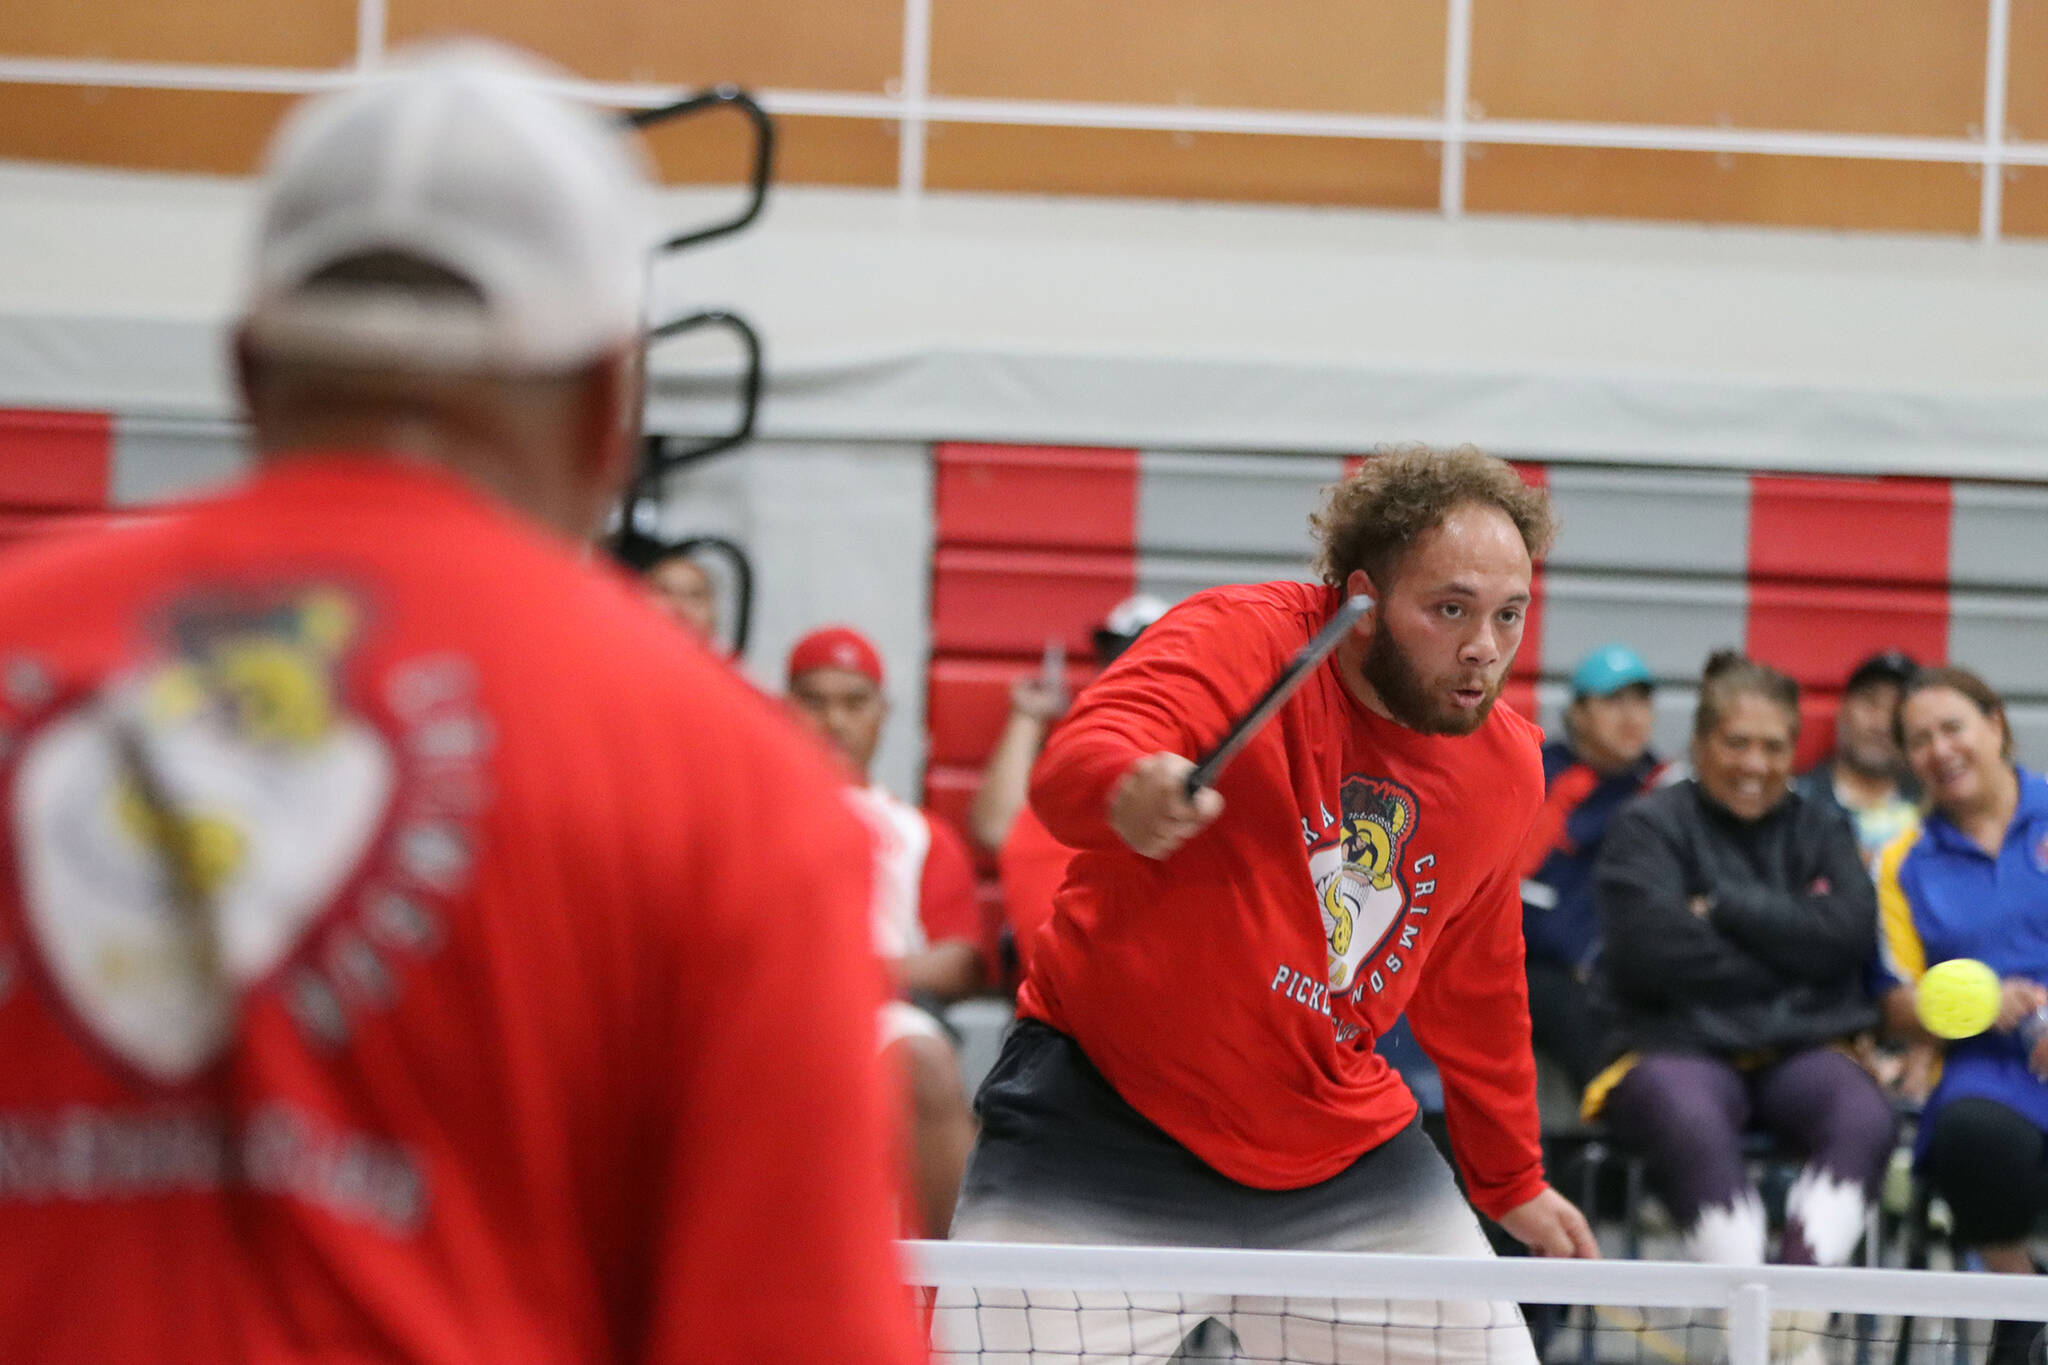 Vaipuna Toutaiolepo returns a pickleball over the net Saturday afternoon at Floyd Dryden Middle School. Toutaiolepo, a member of the Alaska Crimson Bear Pickleball Club, was among dozens of players to participate in a tournament. (Ben Hohenstatt / Juneau Empire)